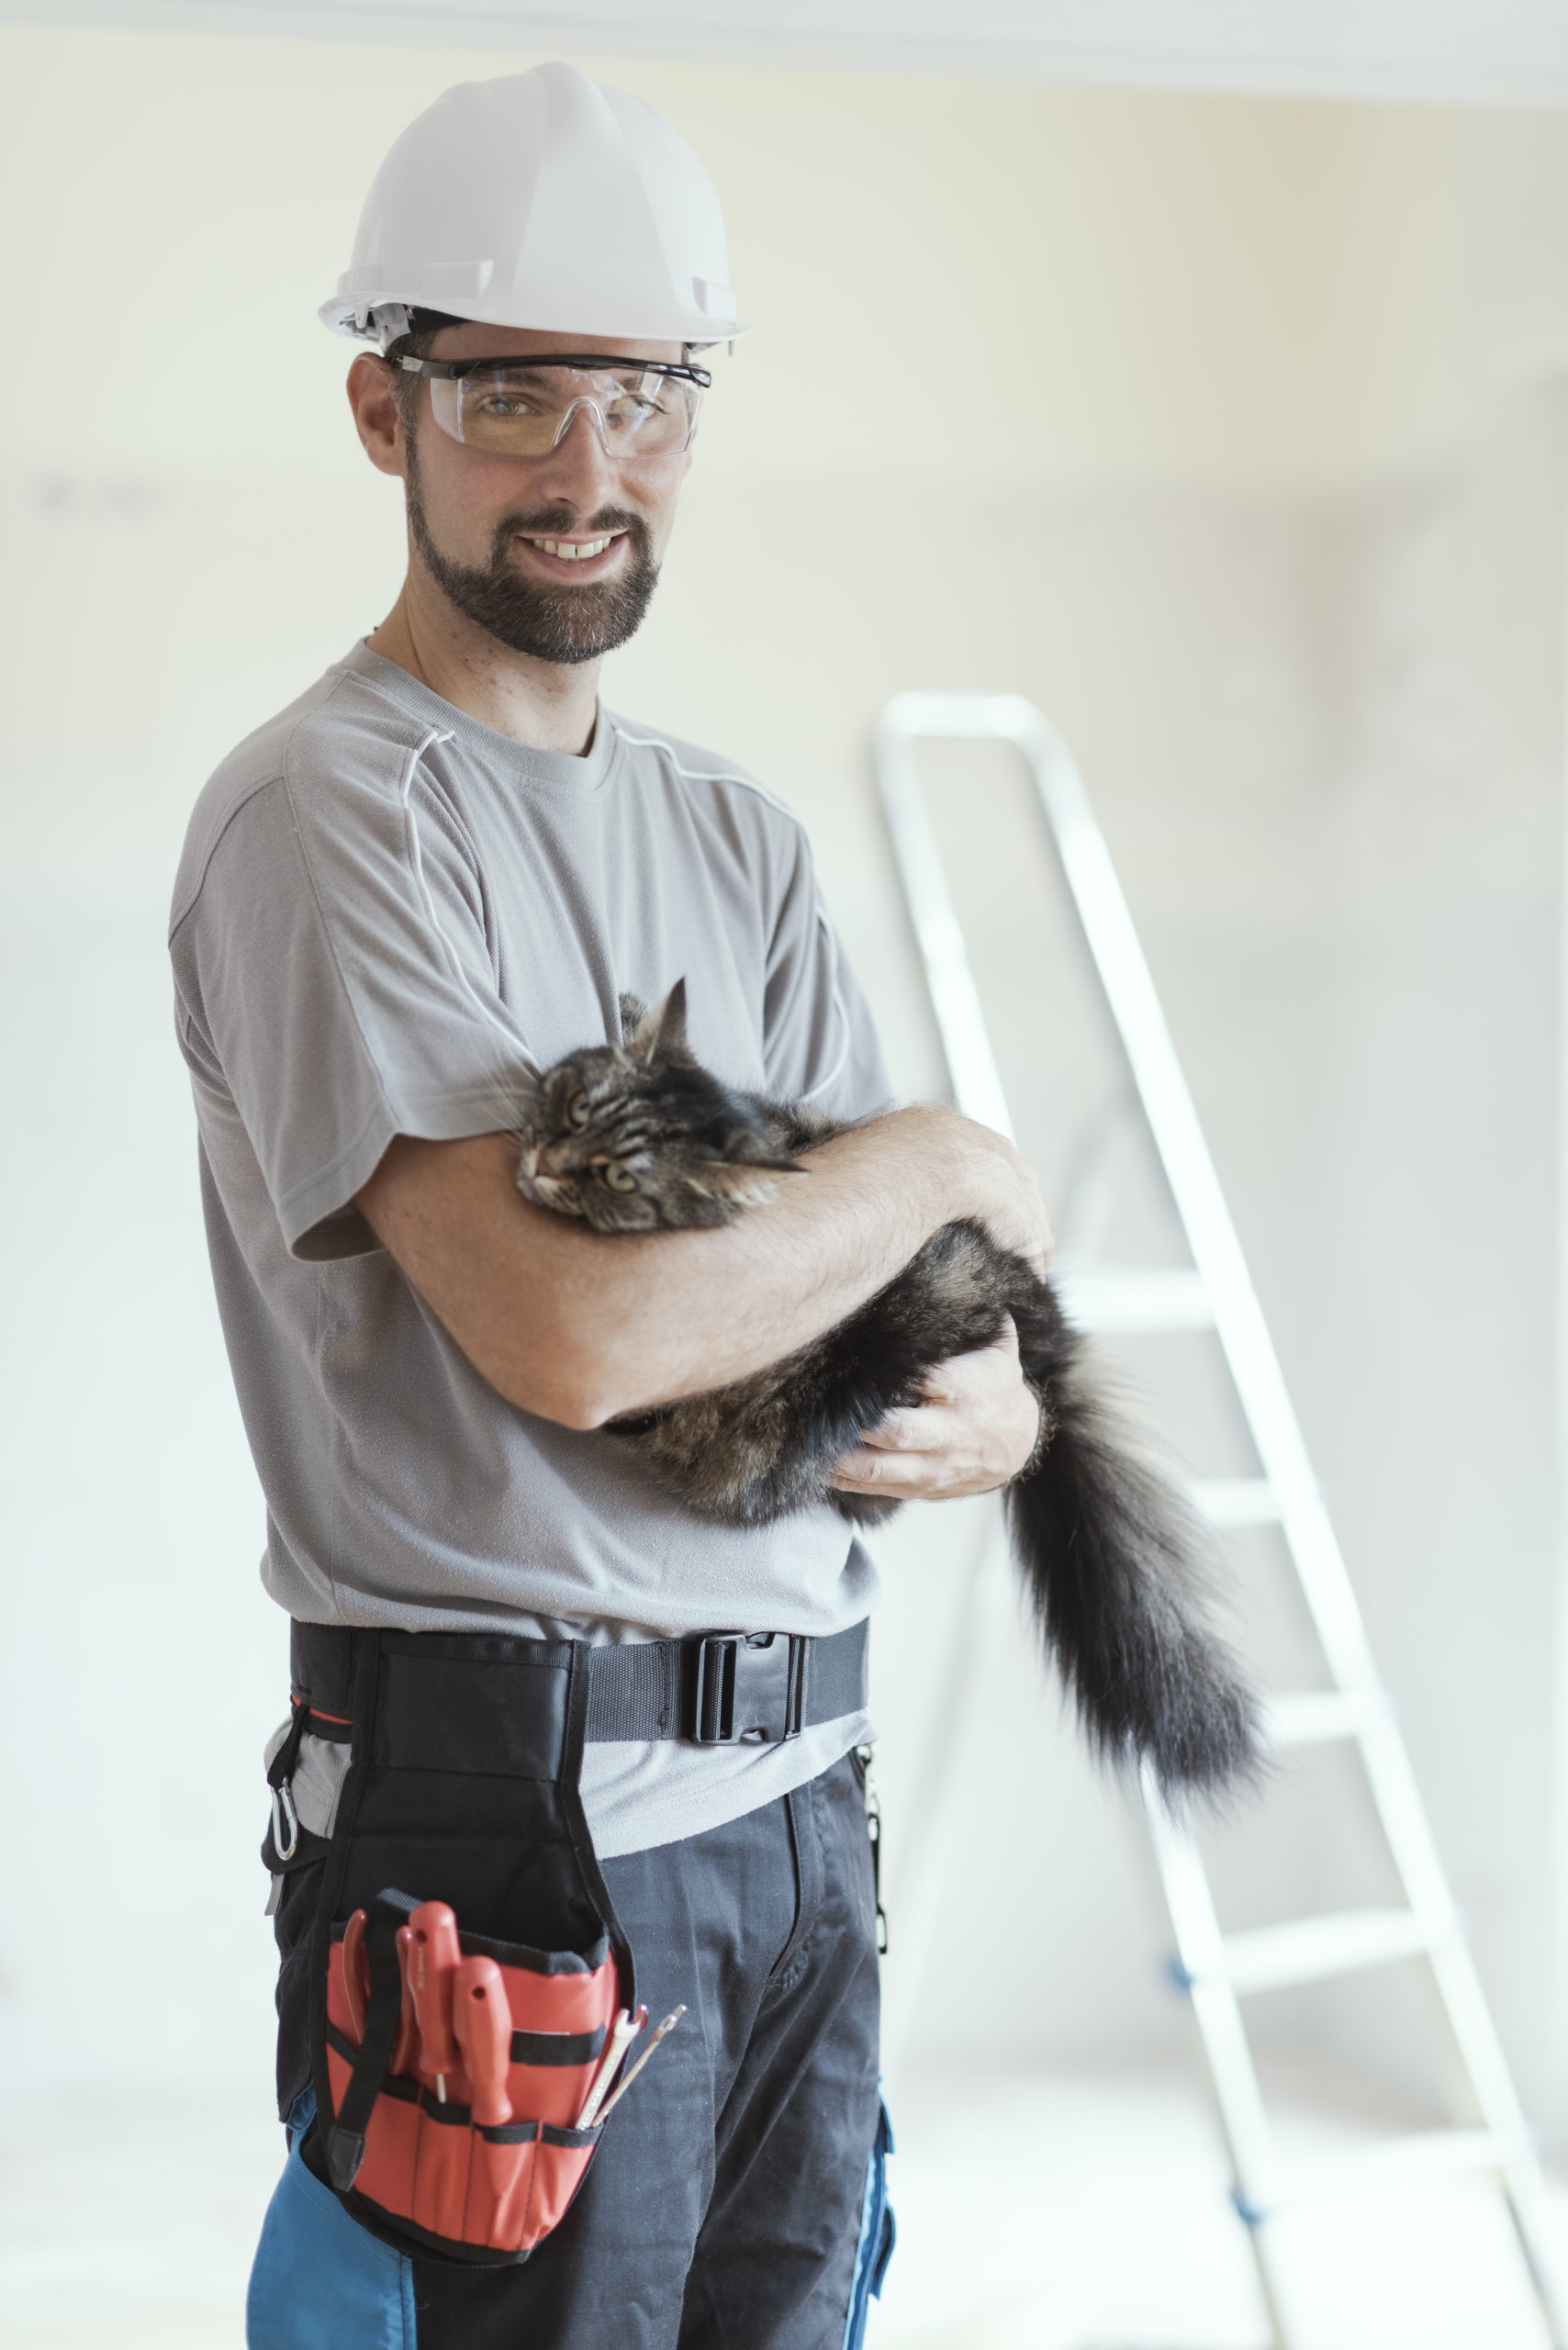 Man holding a cat and dressed in construction attire